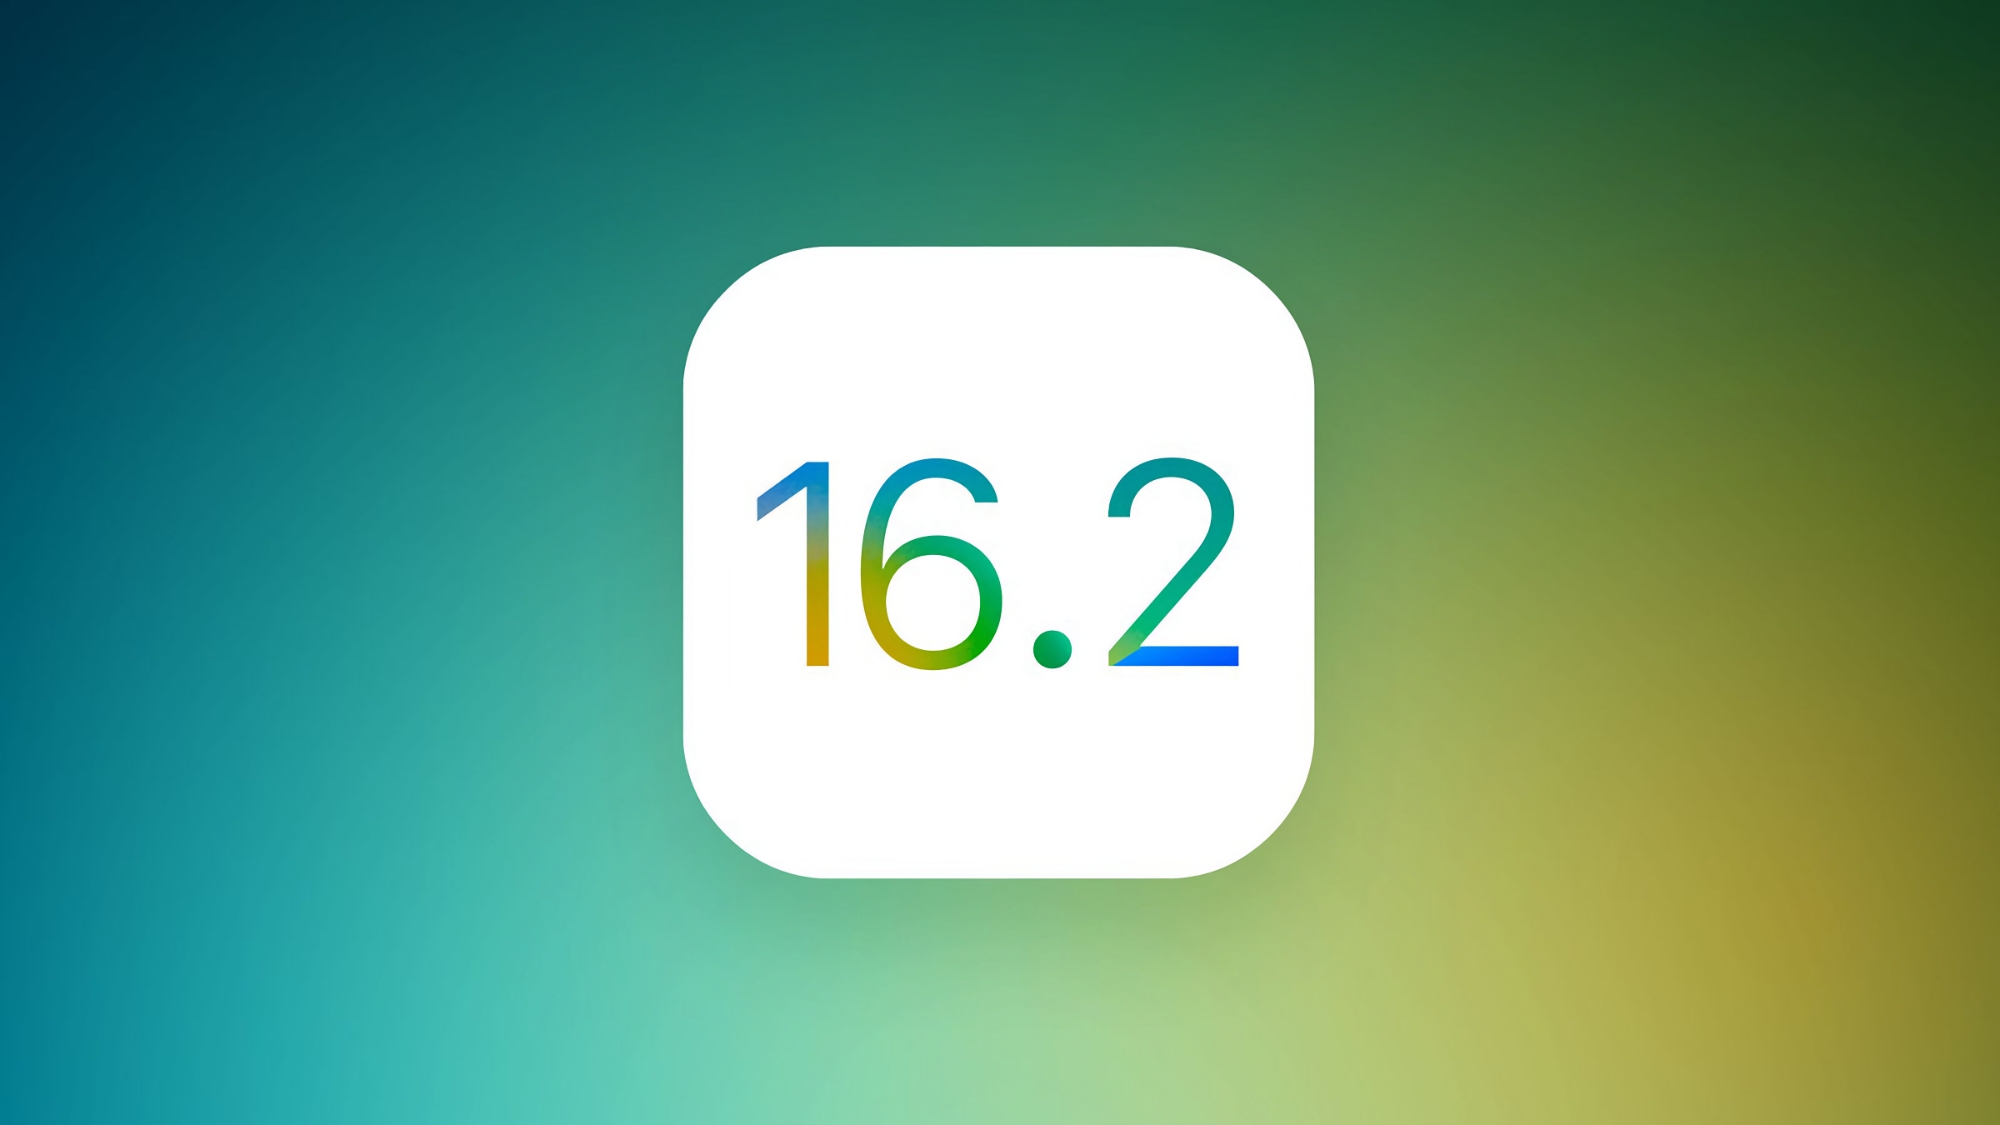 Apple released the fourth beta version of iOS 16.2 and iPadOS 16.2: what's new